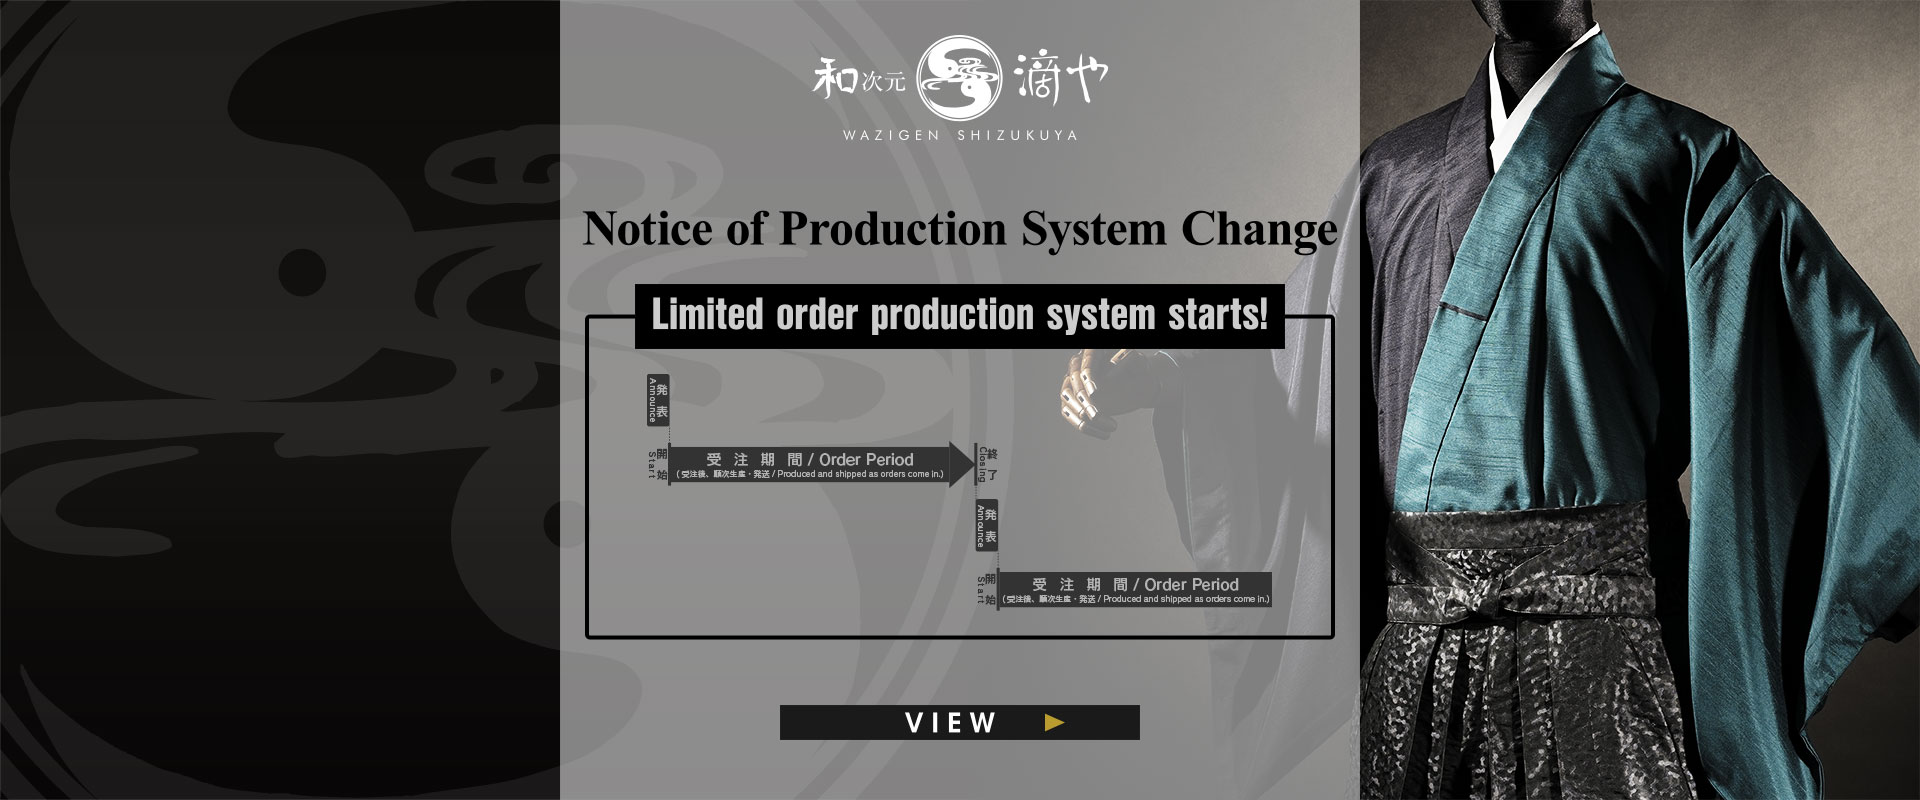 [PHOTO:Limited order production system starts!]